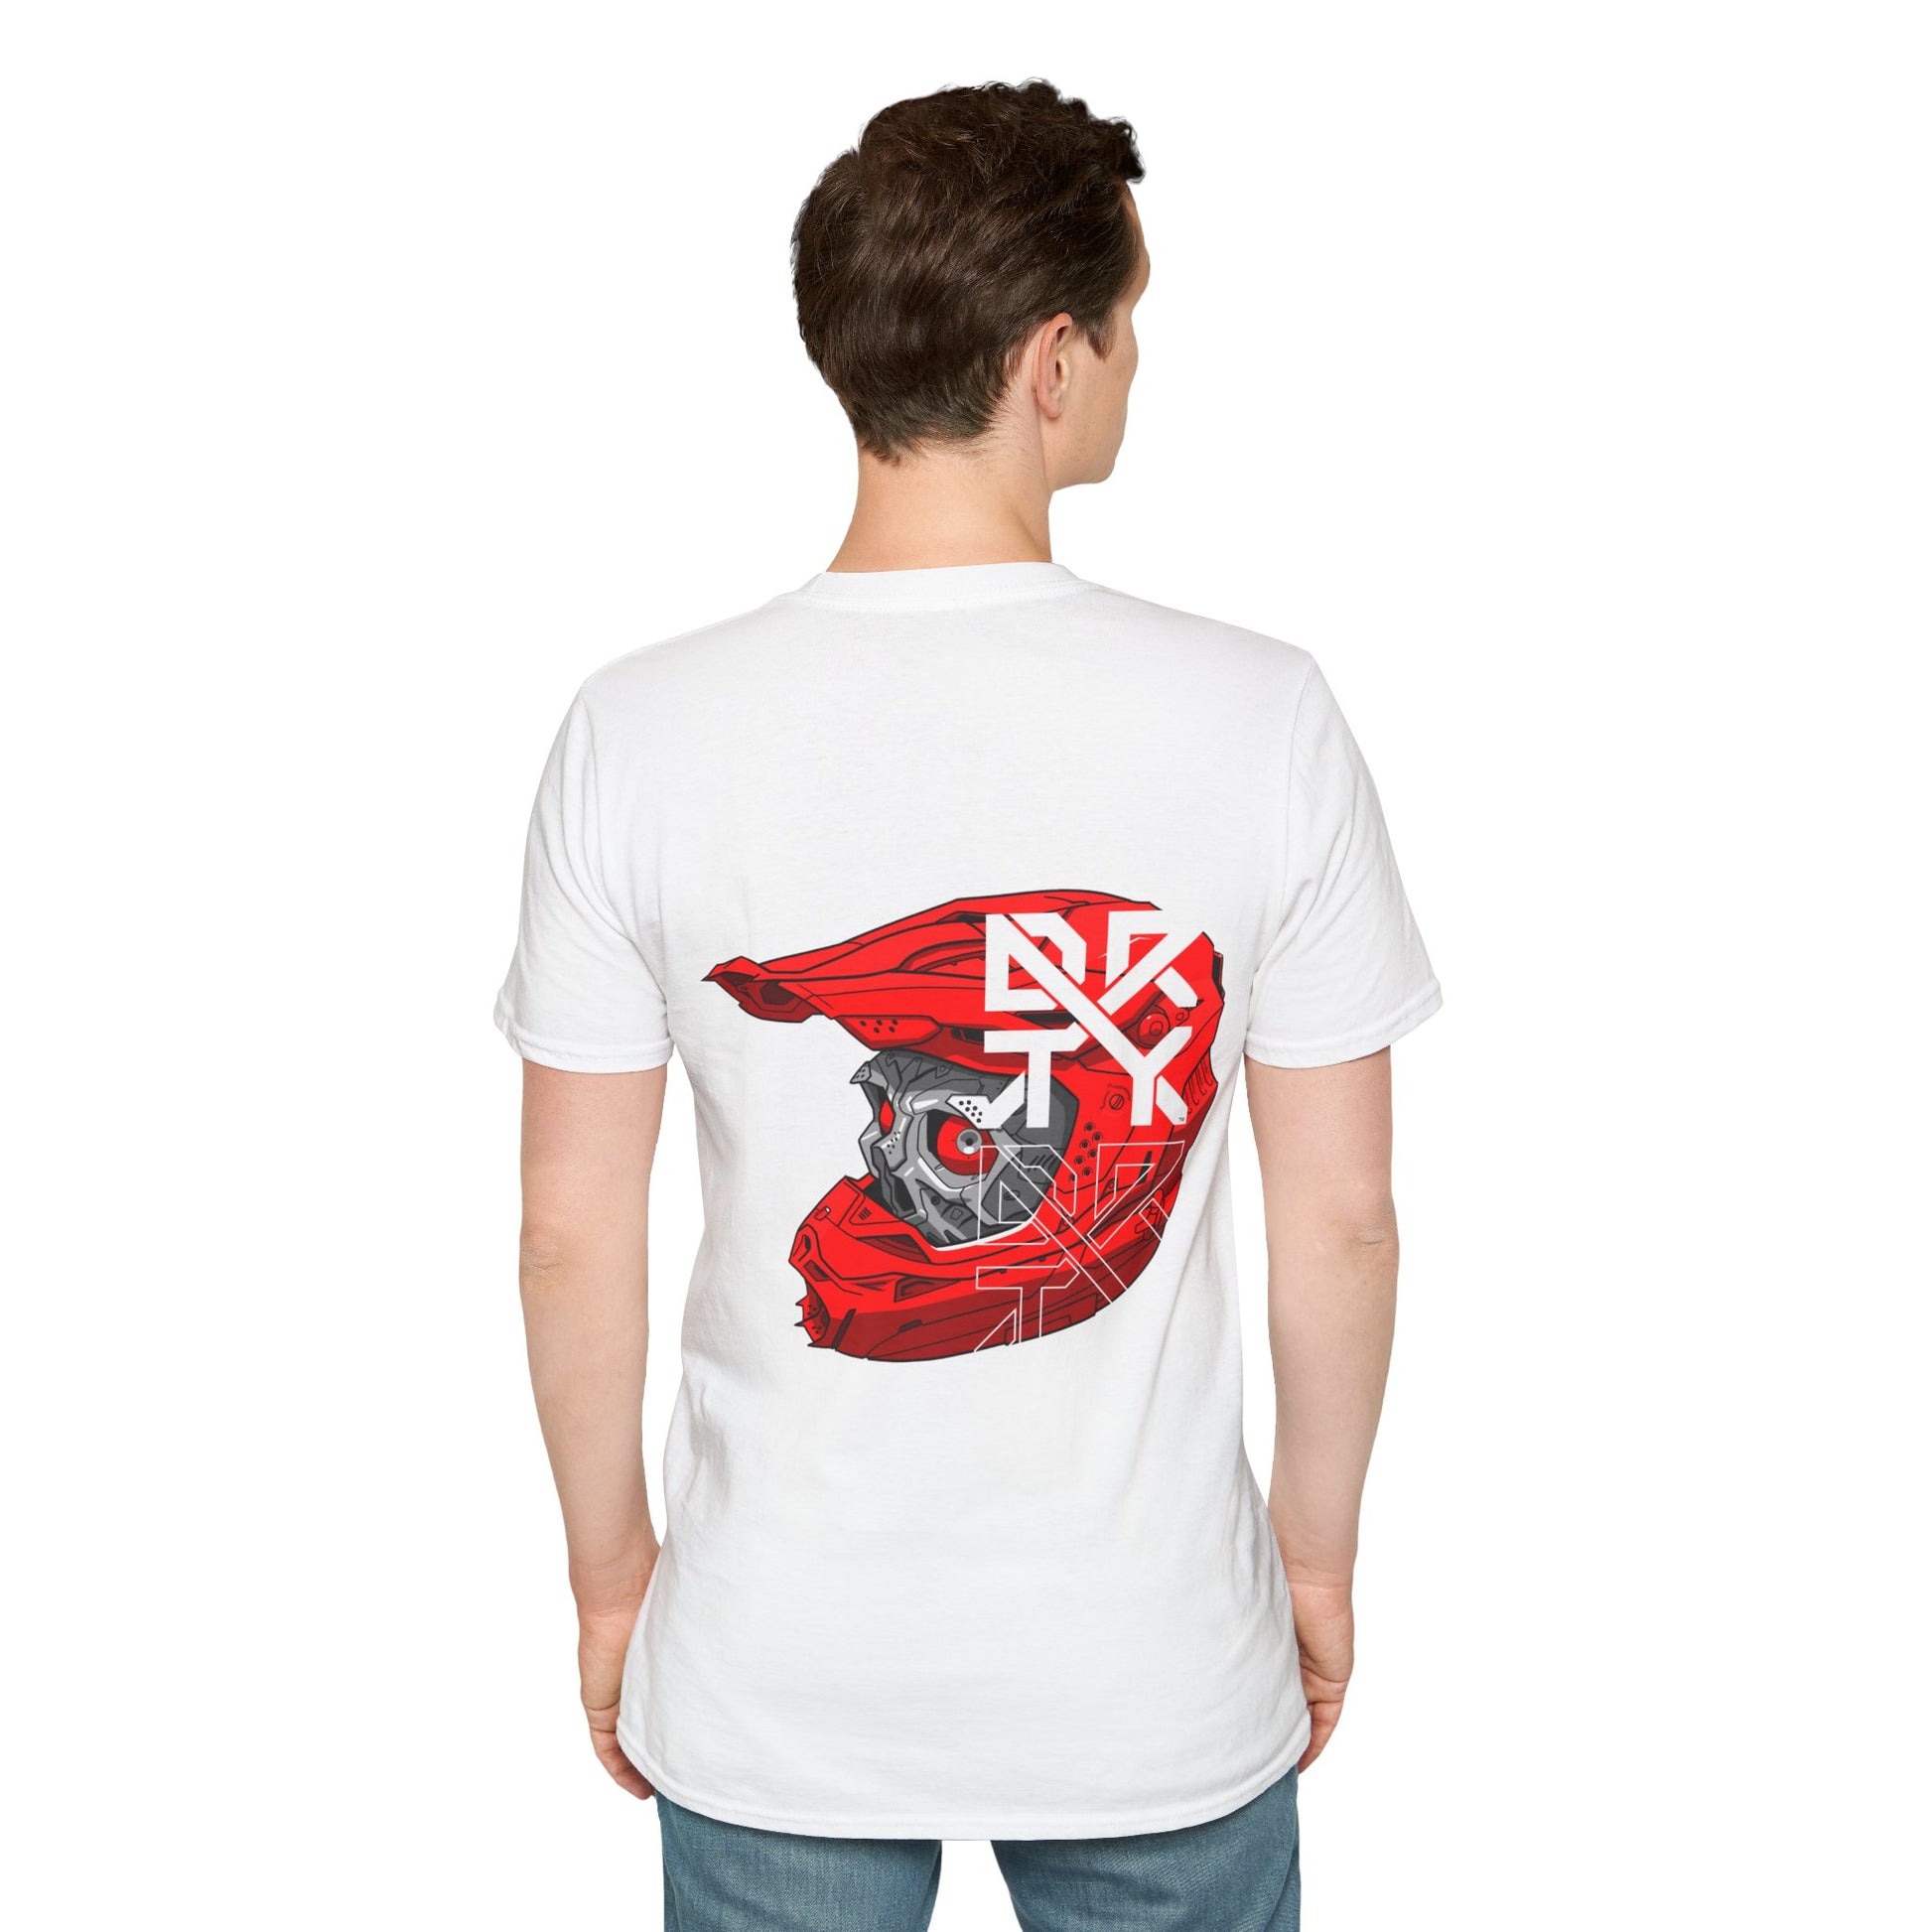 This image showcases a man with the back view of a T-shirt with a cyber skull inside of a motocross helmet with a DRTY X logo on the helmet.